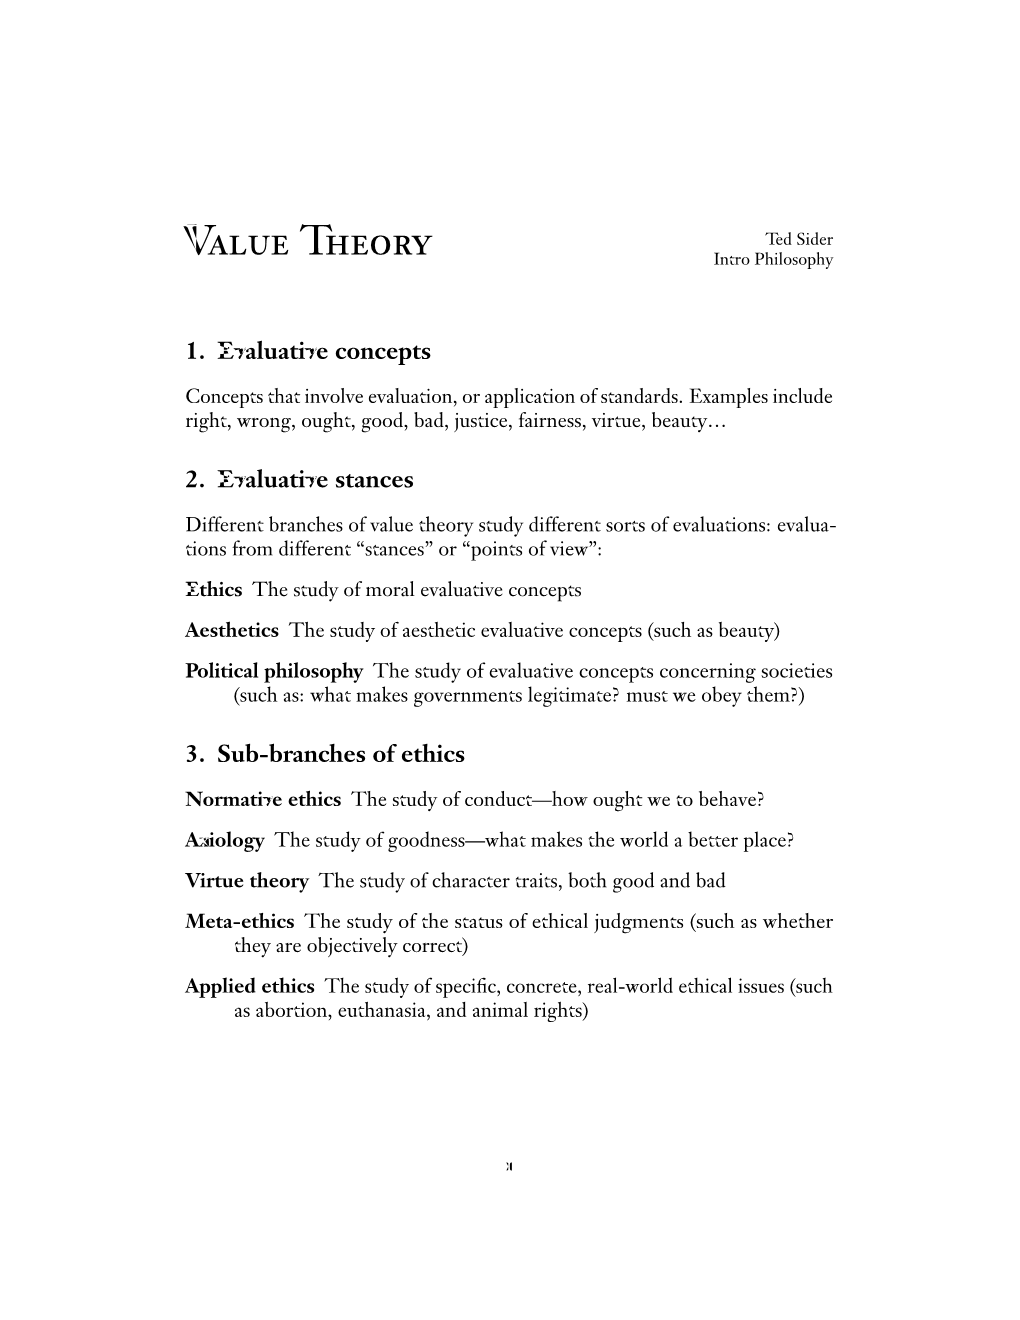 Value Theory Intro Philosophy